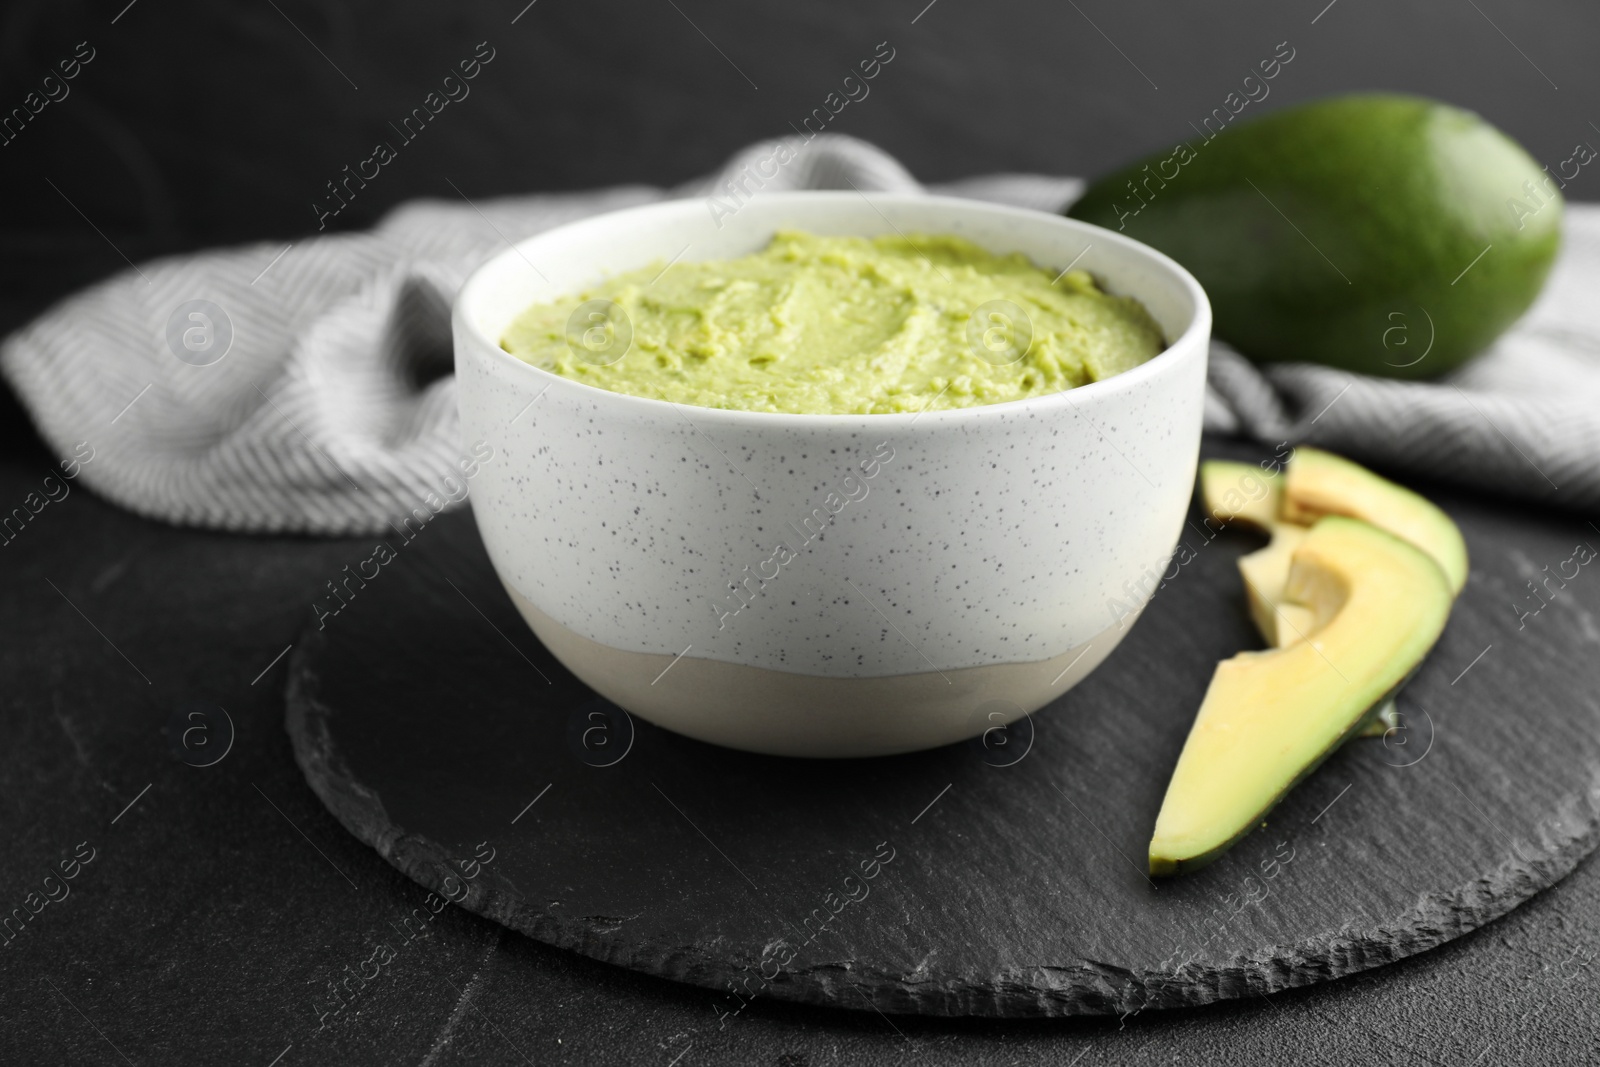 Photo of Bowl with guacamole made of ripe avocados served on black table